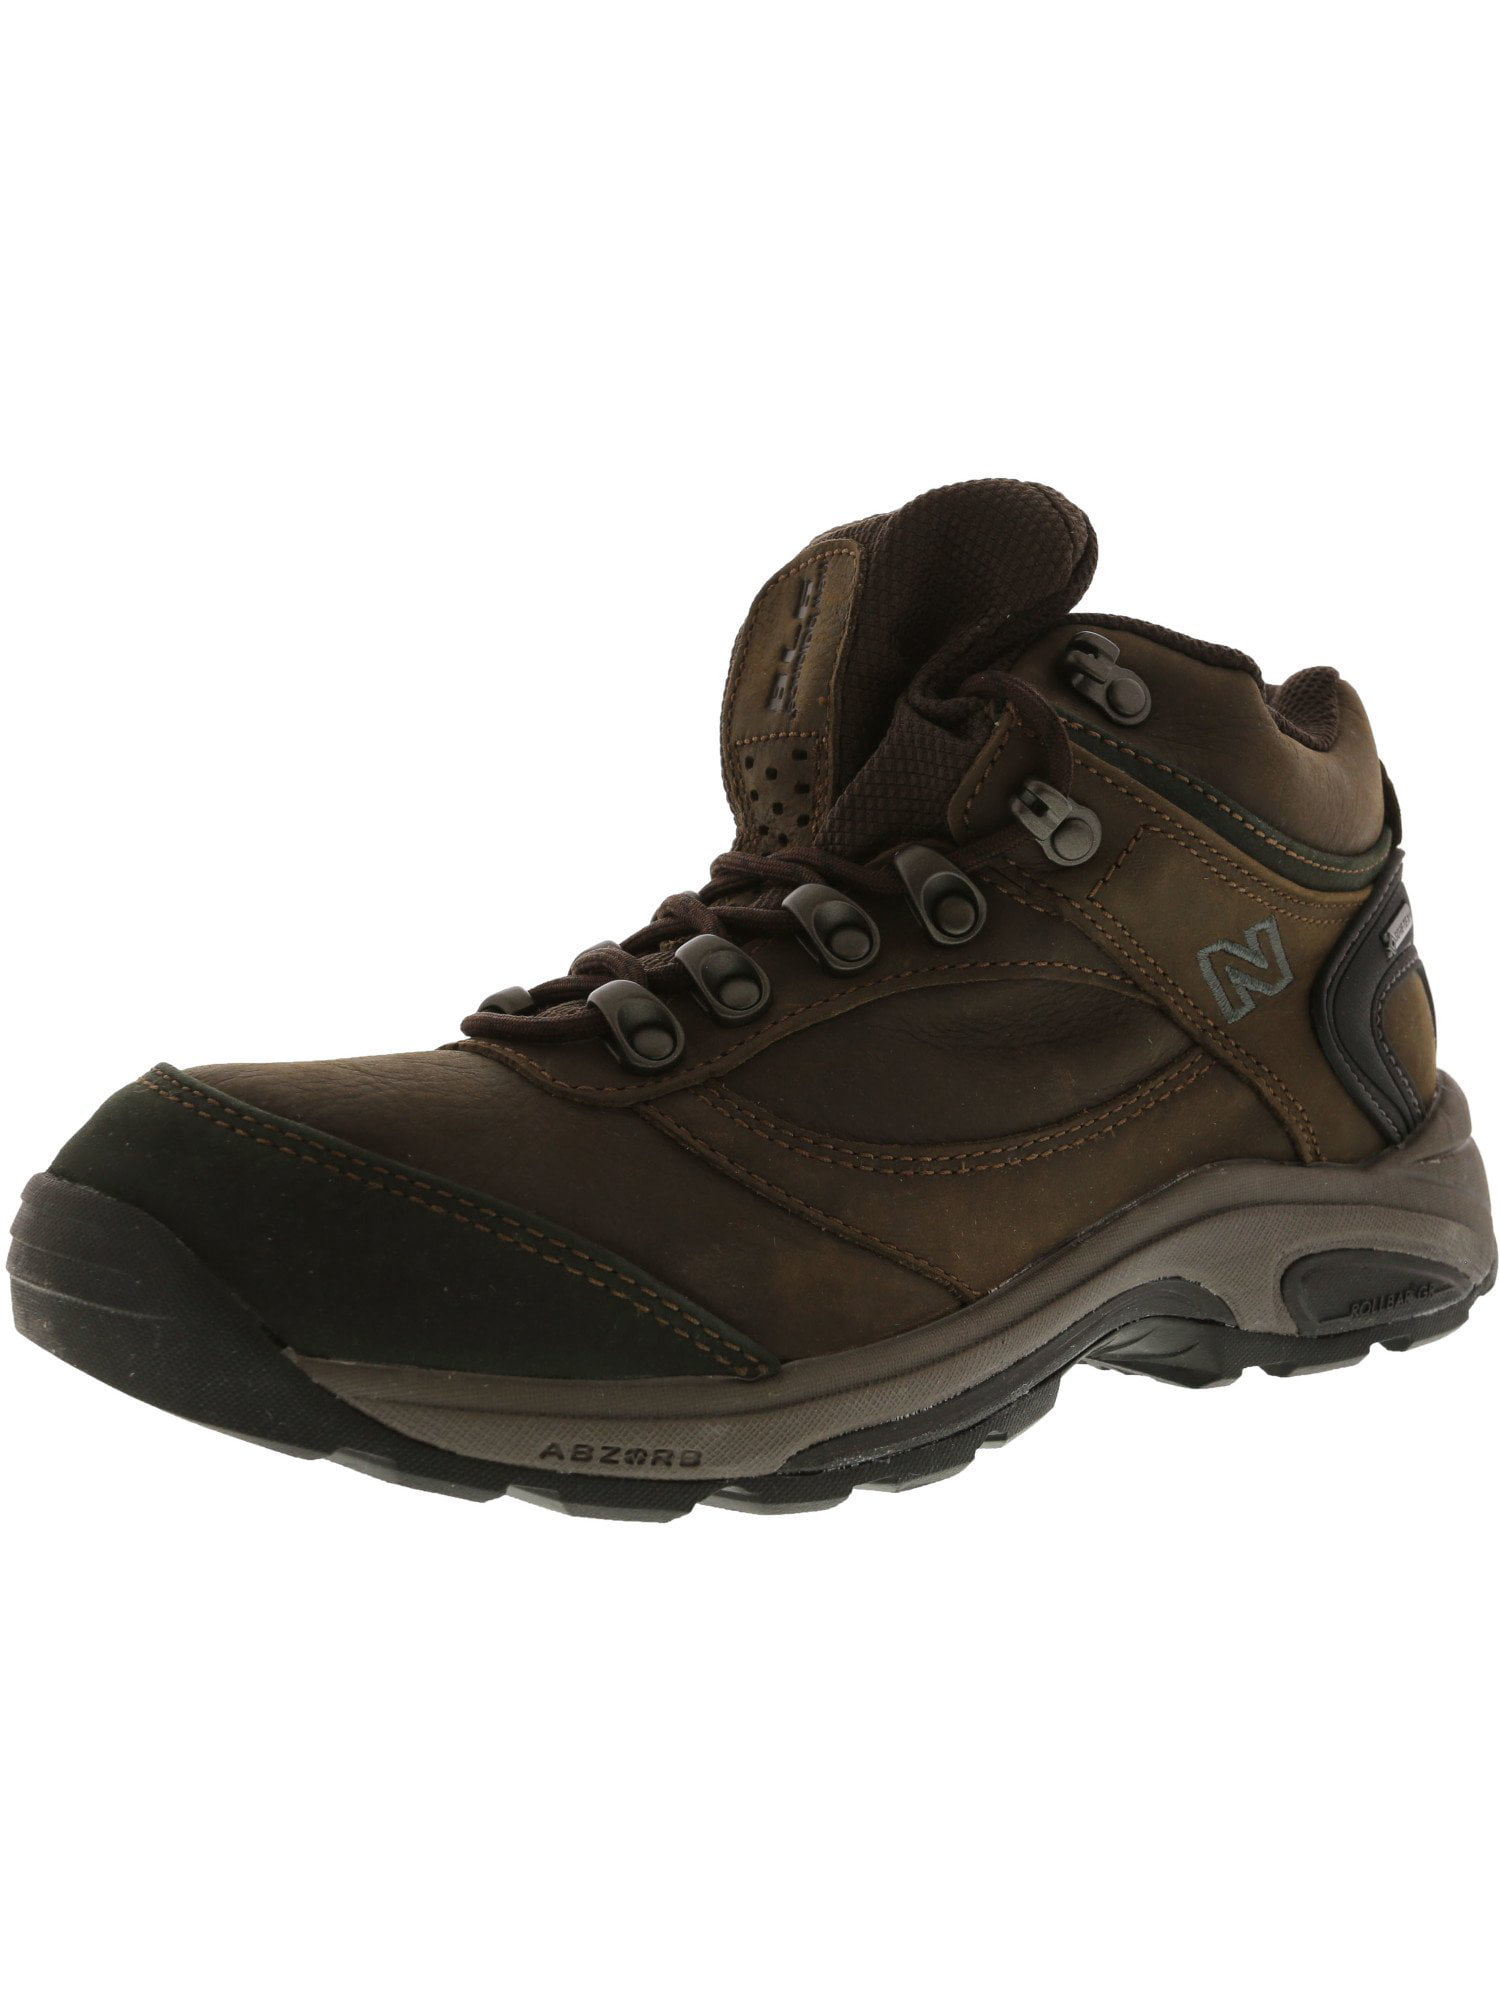 Mw978 Gt Mid-Top Leather Hiking Shoe 